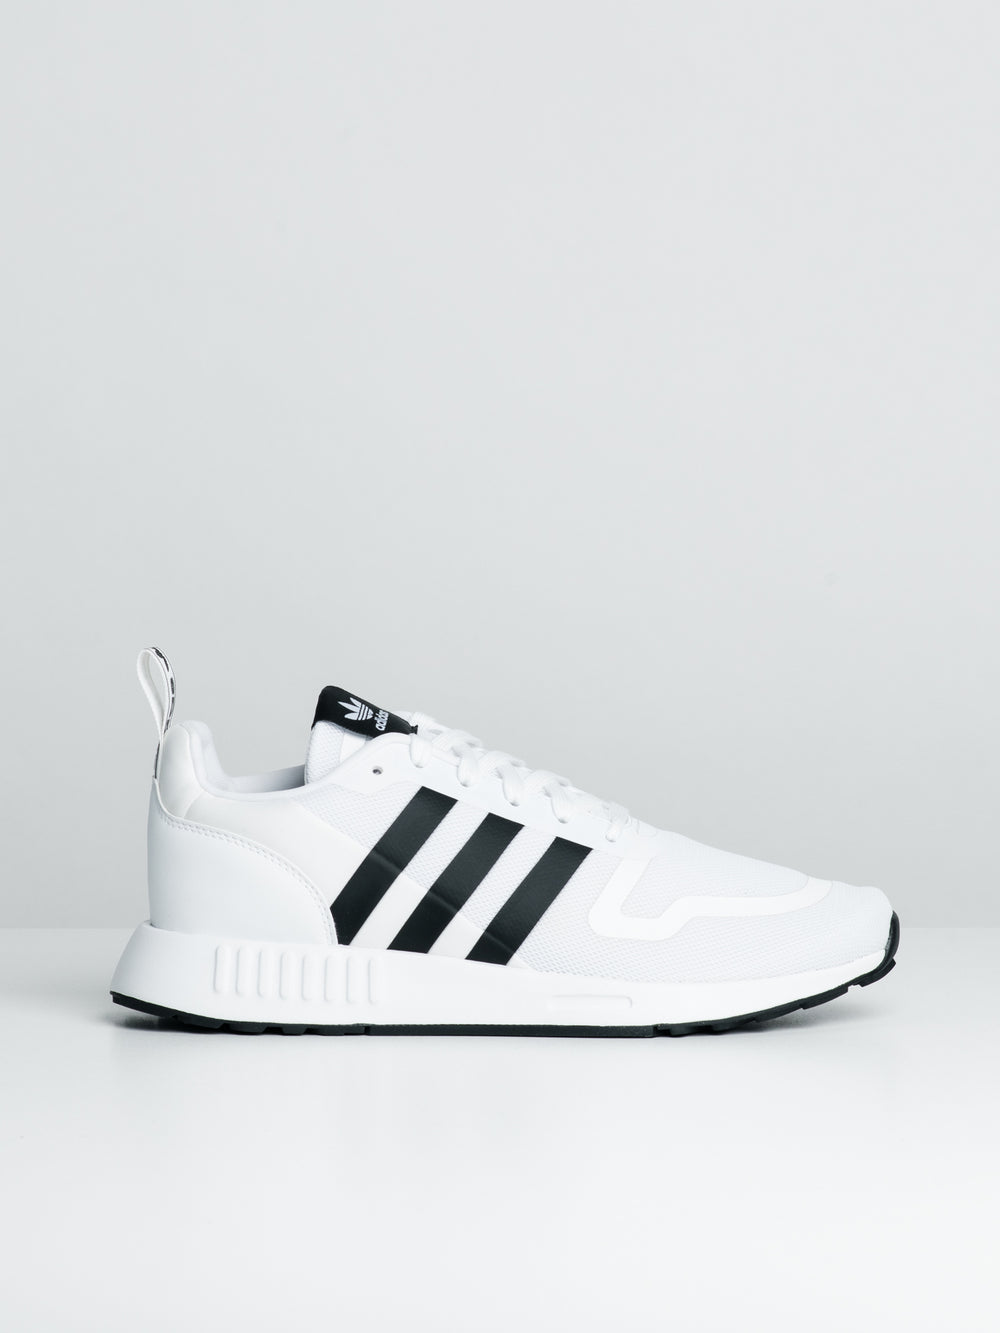 ADIDAS SMOOTH RUNNER POUR HOMME - DÉSTOCKAGE